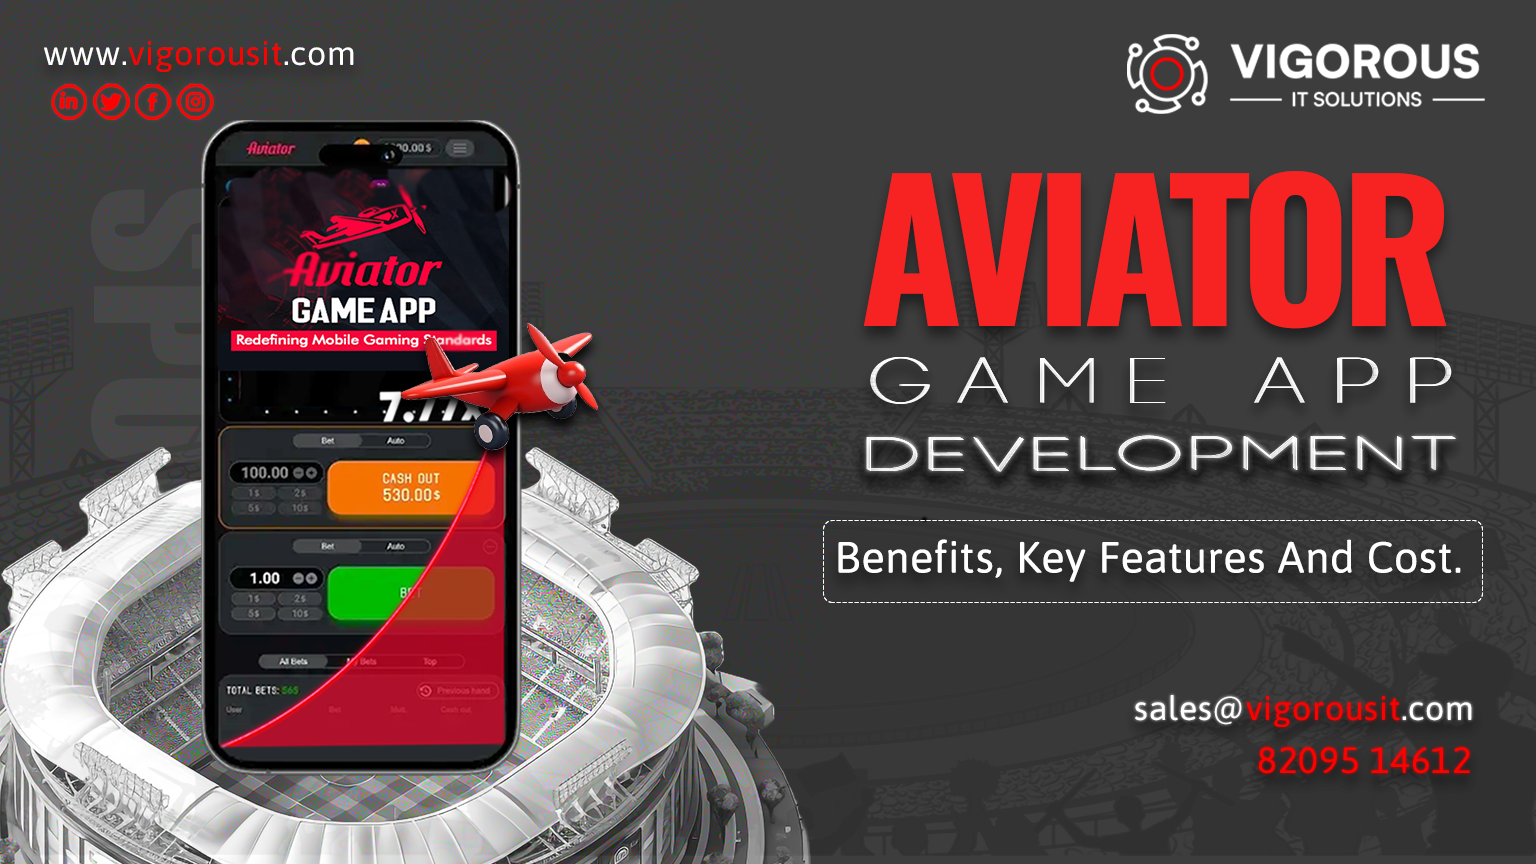 Aviator Game App Development- Benefits, Key Features And Cost